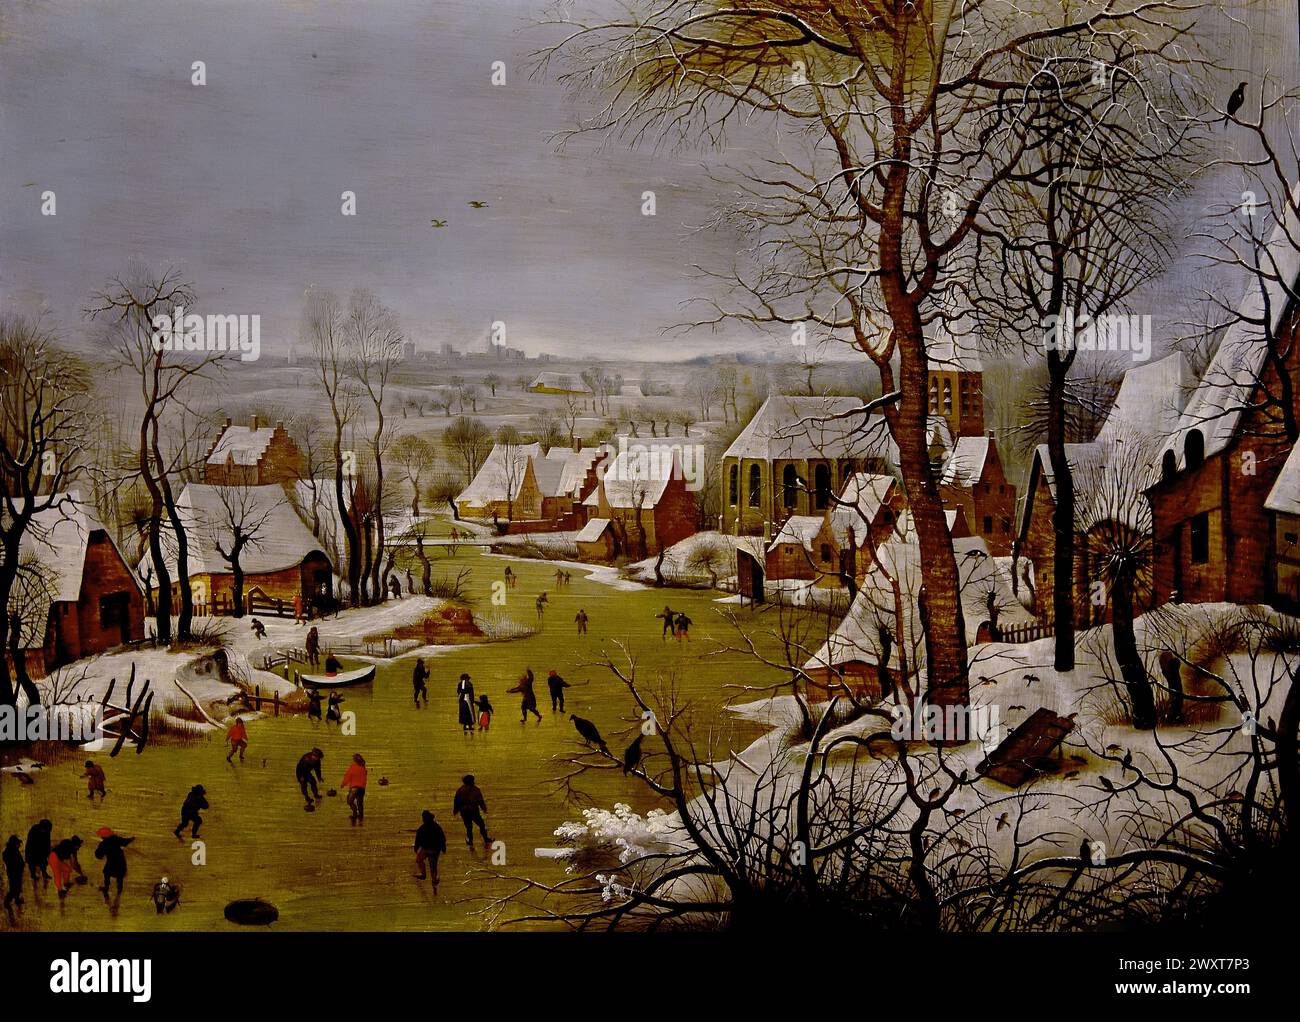 Winter landscape with bird's eye view and the flight to Egypt by  Pieter (II) Brueghel 1622 Museum Mayer van den Bergh,  Antwerp, Belgium, Belgian.( One of the oldest copies after the original by Pieter Bruegel I, dated 1565, in Brussels, K.M.S.K. (ex-commissioned Delporte). Exceptionally, this response features a group of the fleeing H.Familie. These figures are also missing from the original. In the threatening birdsong, people wanted to see an allusion to the disasters brought on the Netherlands by the Spanish rule. ) Stock Photo